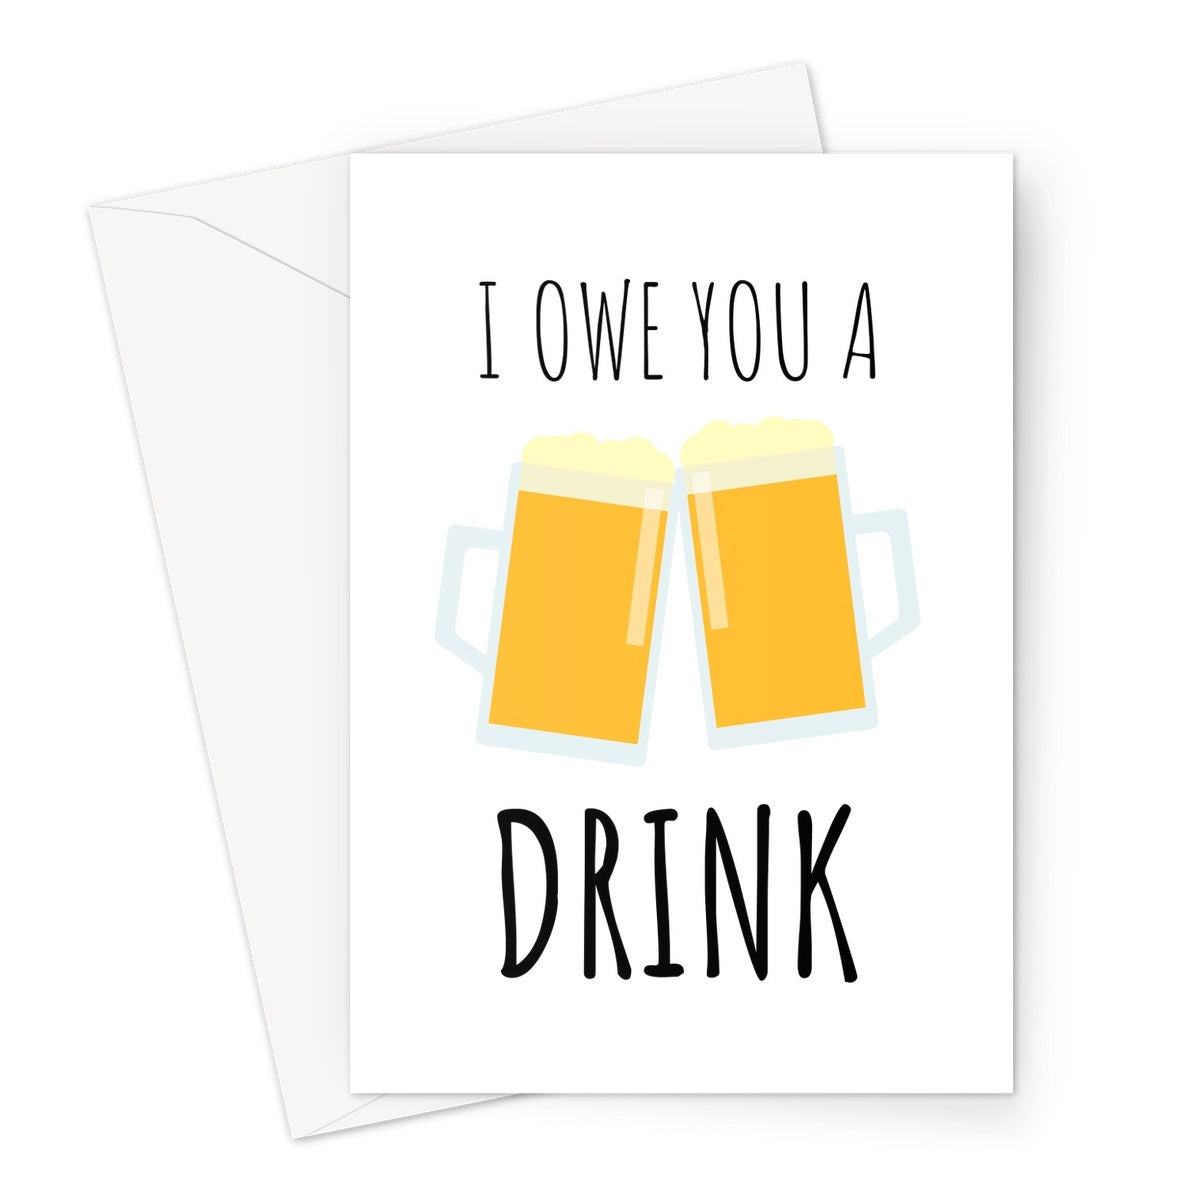 I Owe You A Drink Birthday Anniversary Friends Bar Pub Quarantine Isolation Miss You Funny Love Social Distance Pint Beer Greeting Card